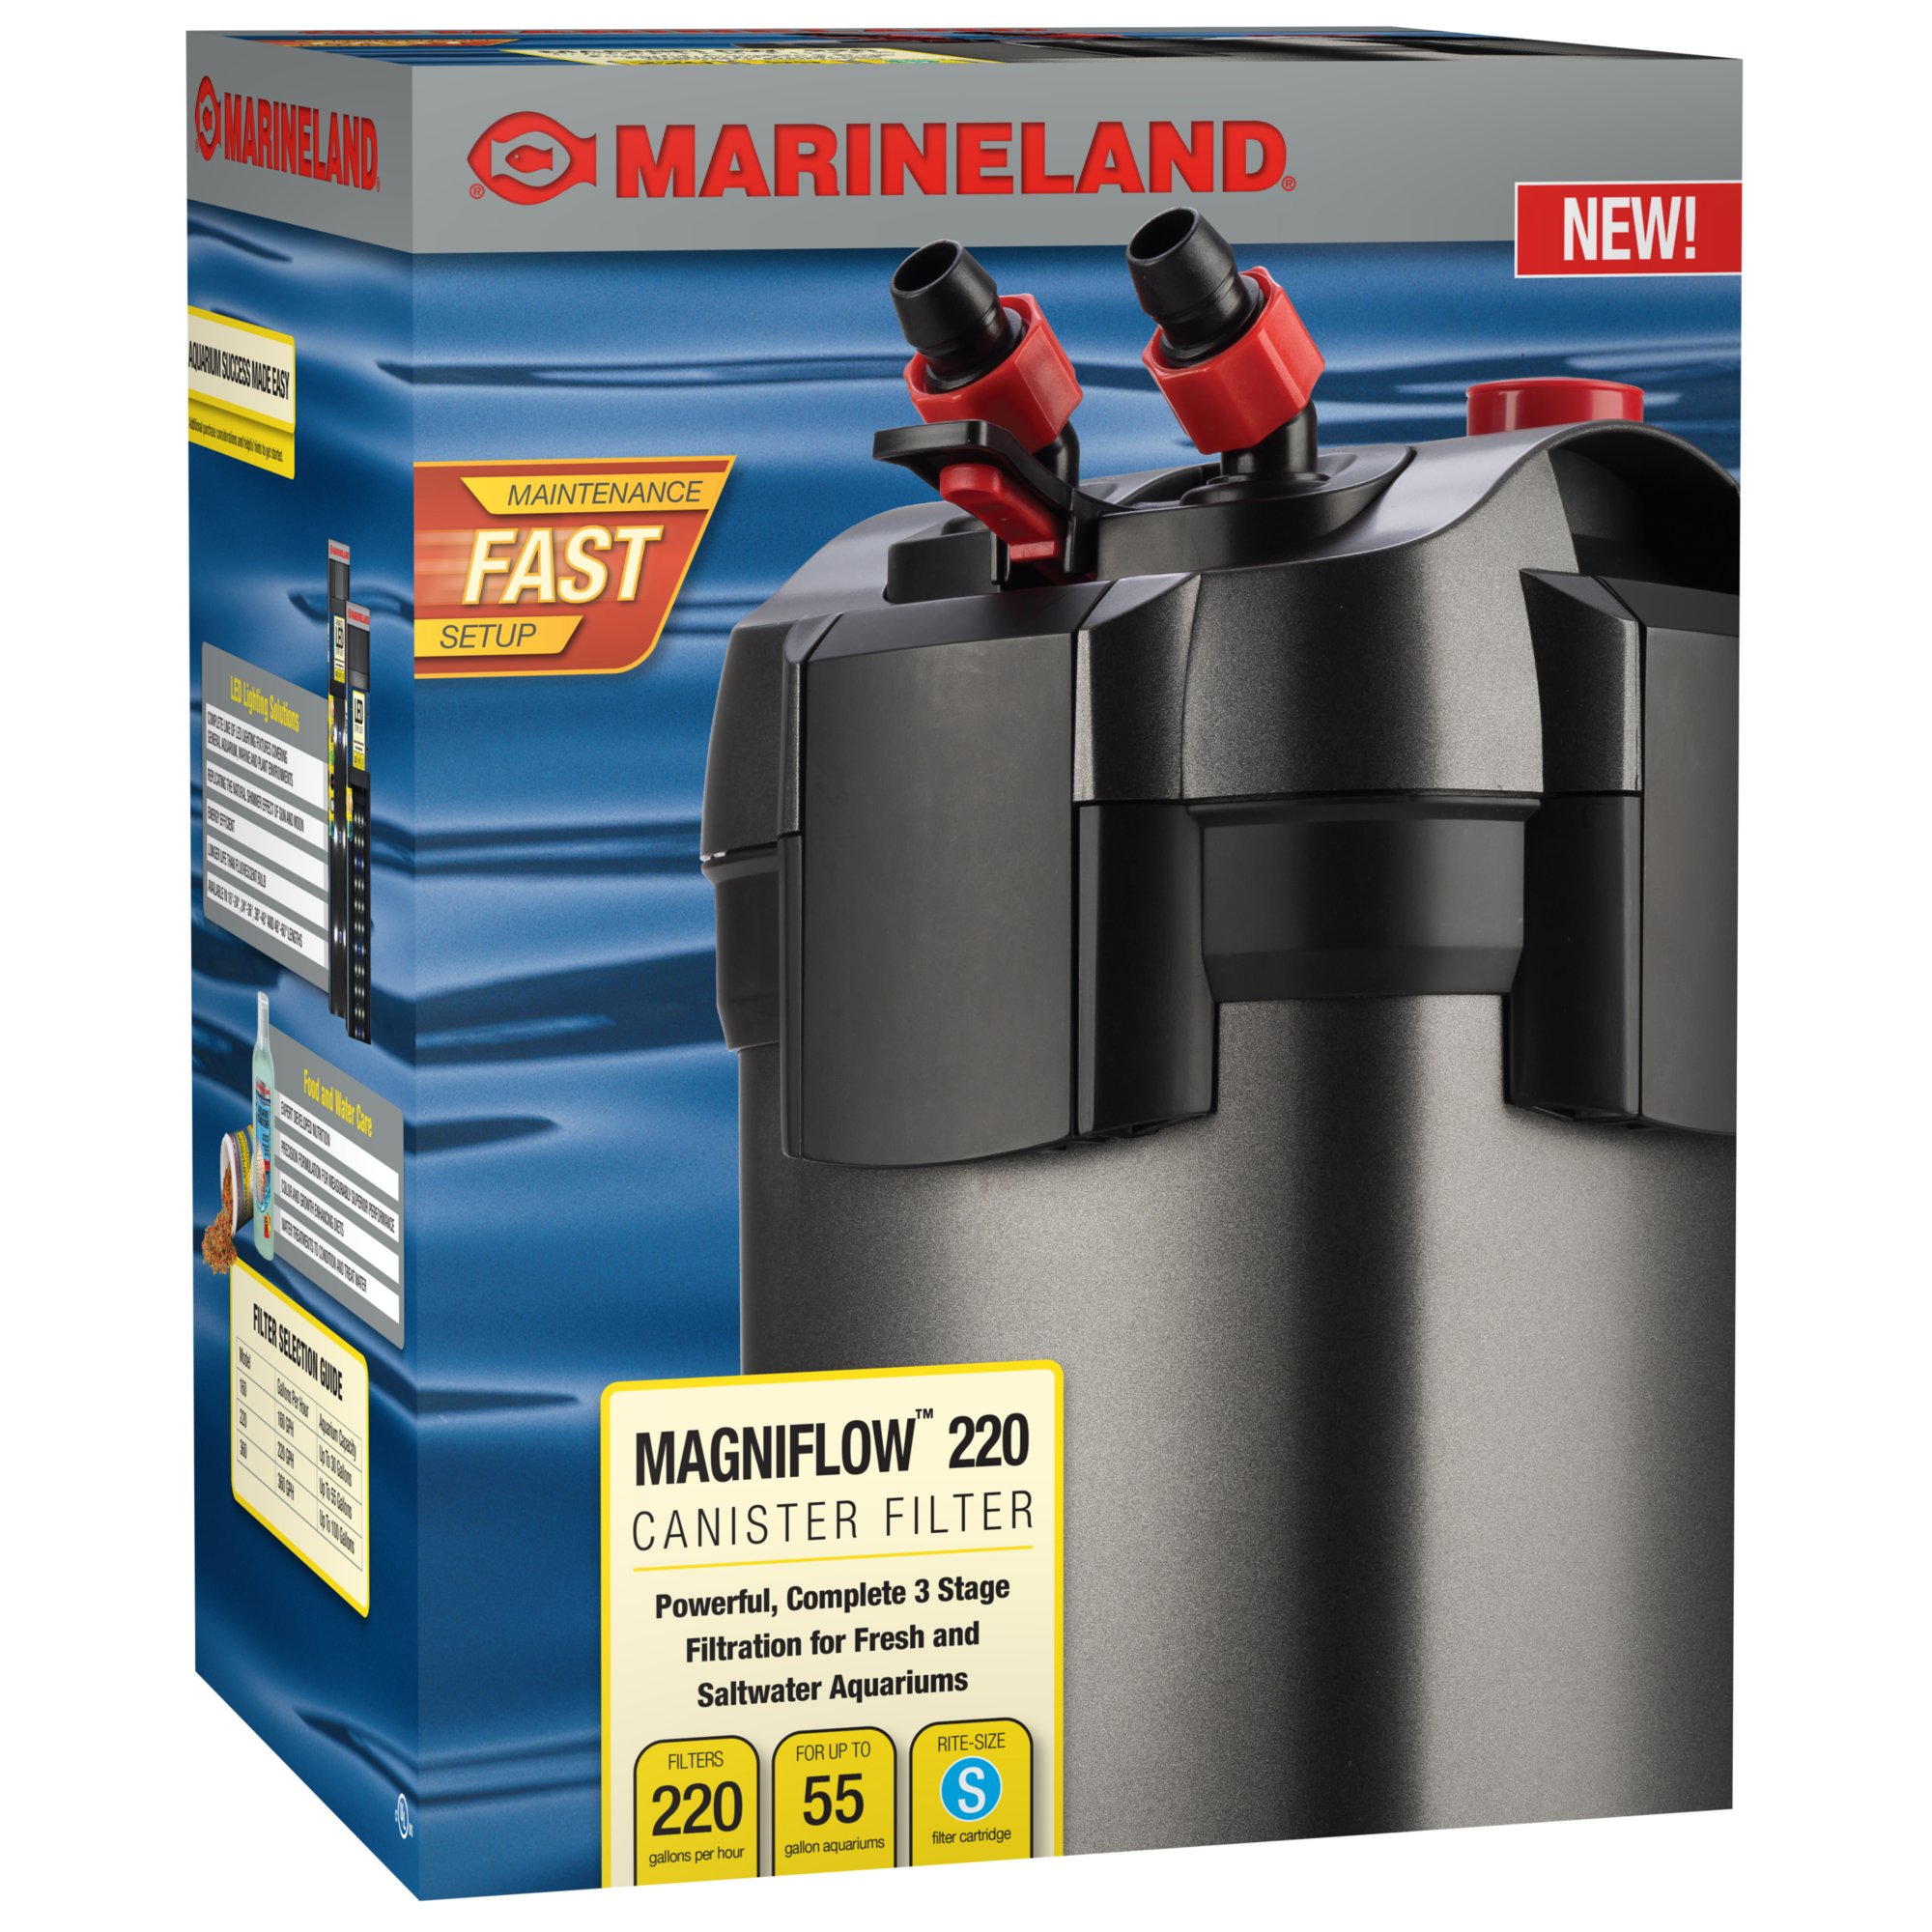 Marineland Magniflow 220 Canister Filter Petco